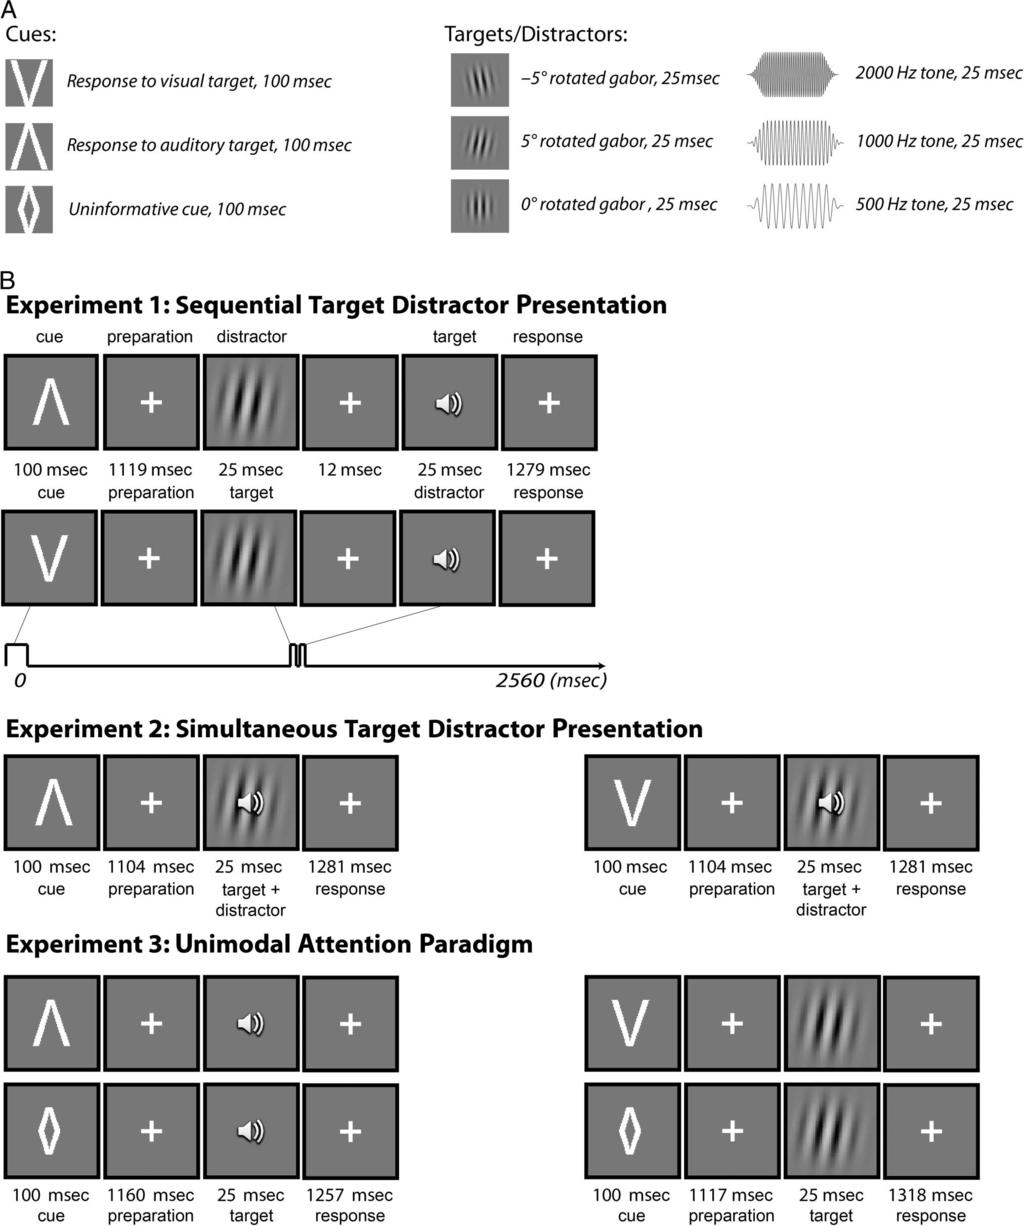 Figure 1. Task figures and example sequences of Experiments 1 3 with stimulus presentation times.